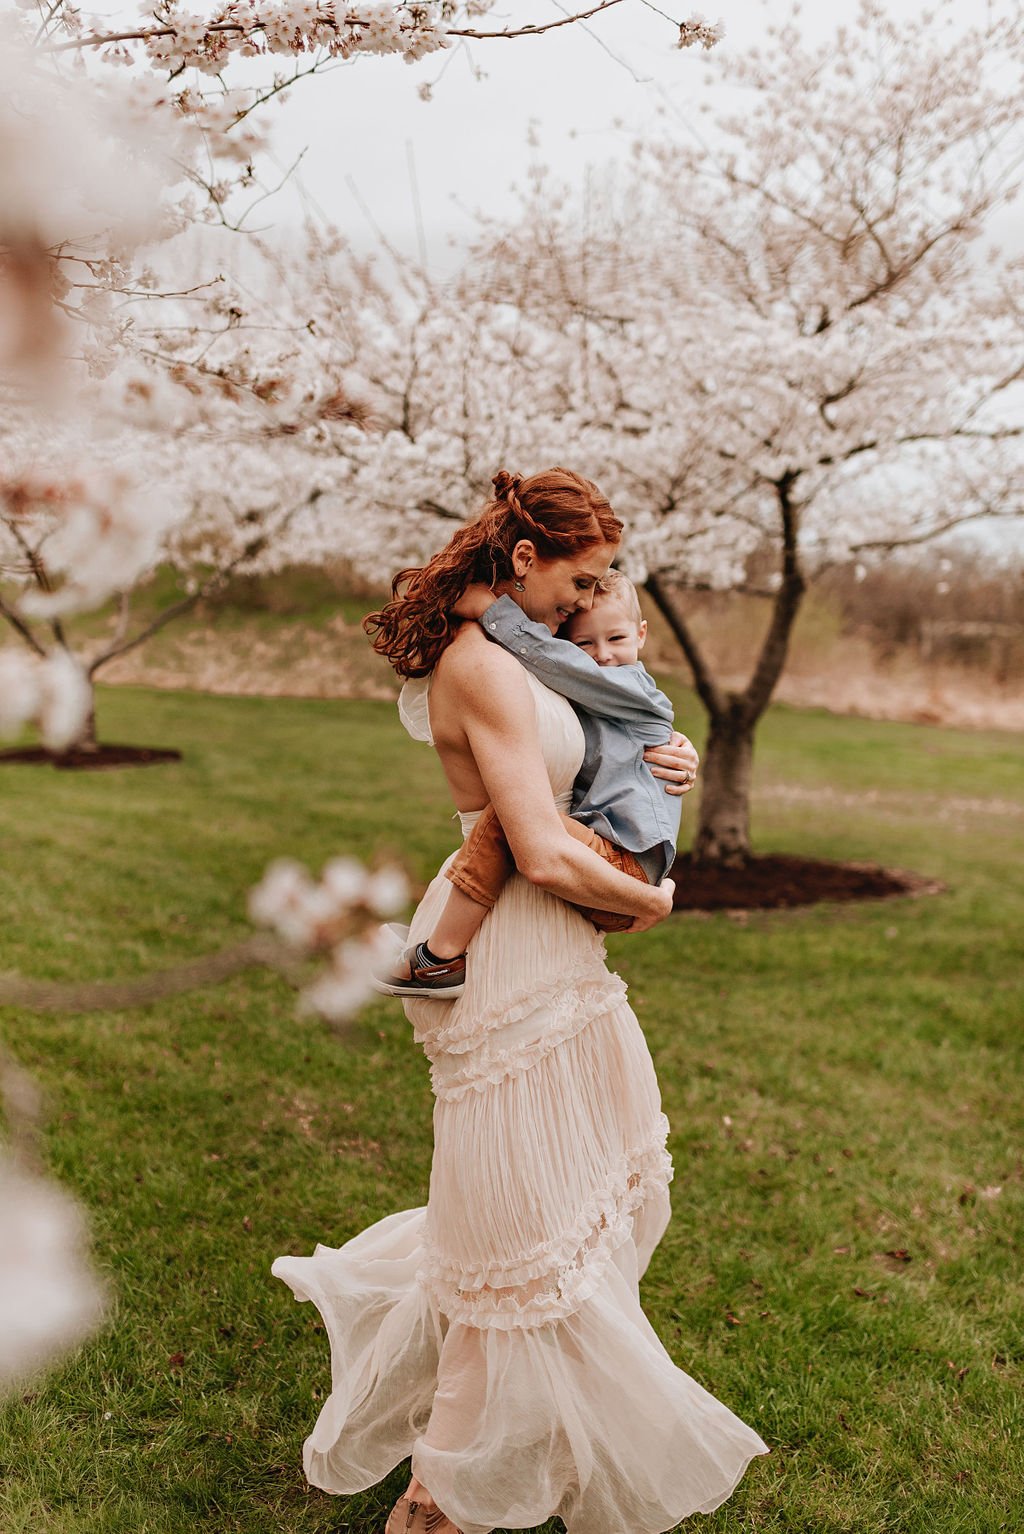 cleveland-ohio-family-mother-daughter-son-outdoor-spring-session-flower-cherry-blossoms8.jpg